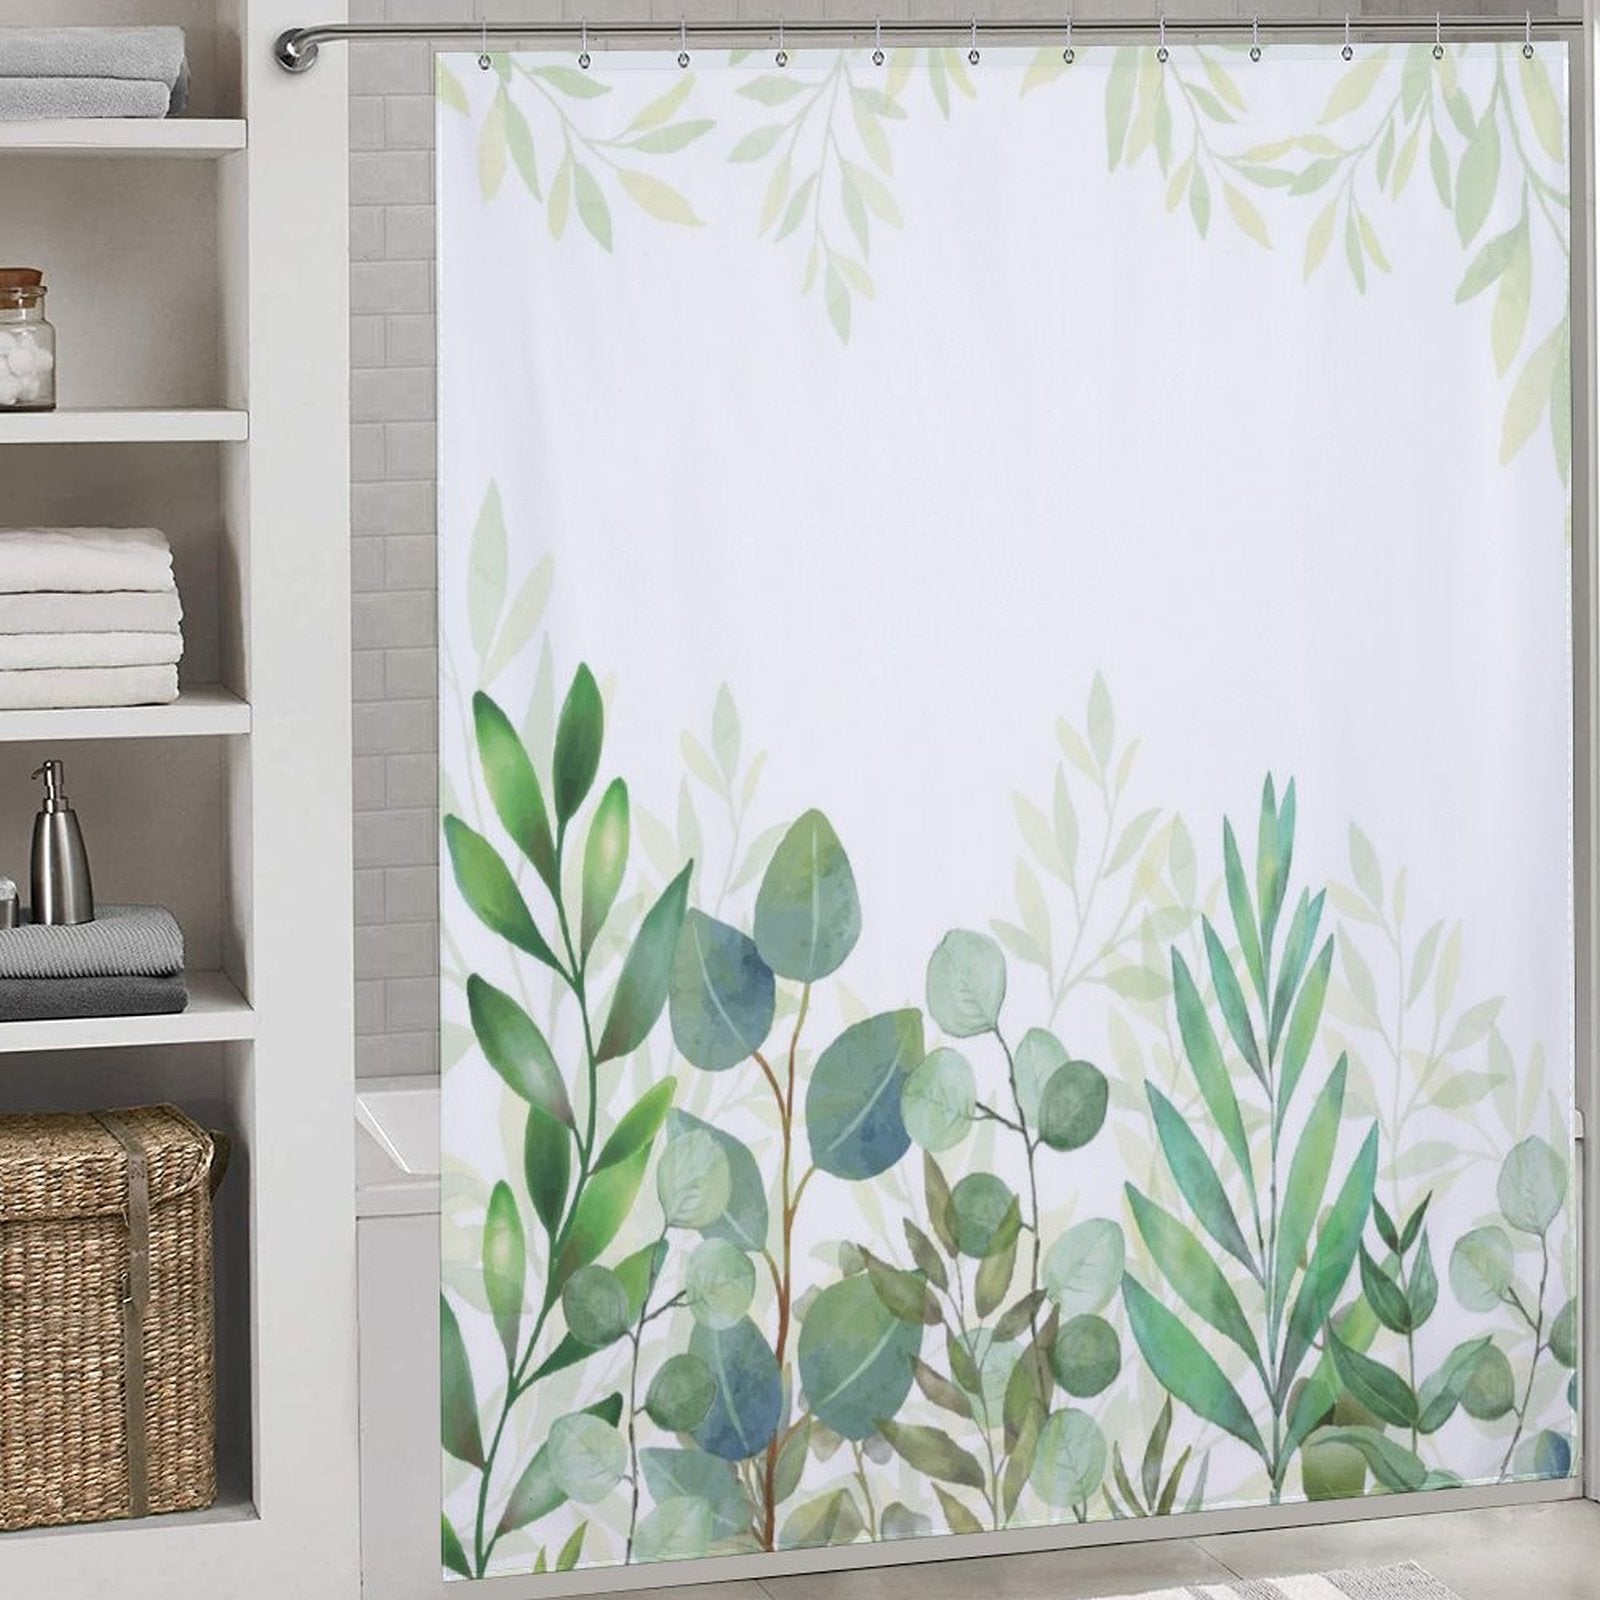 A bathroom with a Cotton Cat Natural Modern Ombre Sage Green White Leaf Shower Curtain-Cottoncat. To the left, there are shelves with folded towels and a wicker basket at the bottom, creating a natural, modern ombre effect.